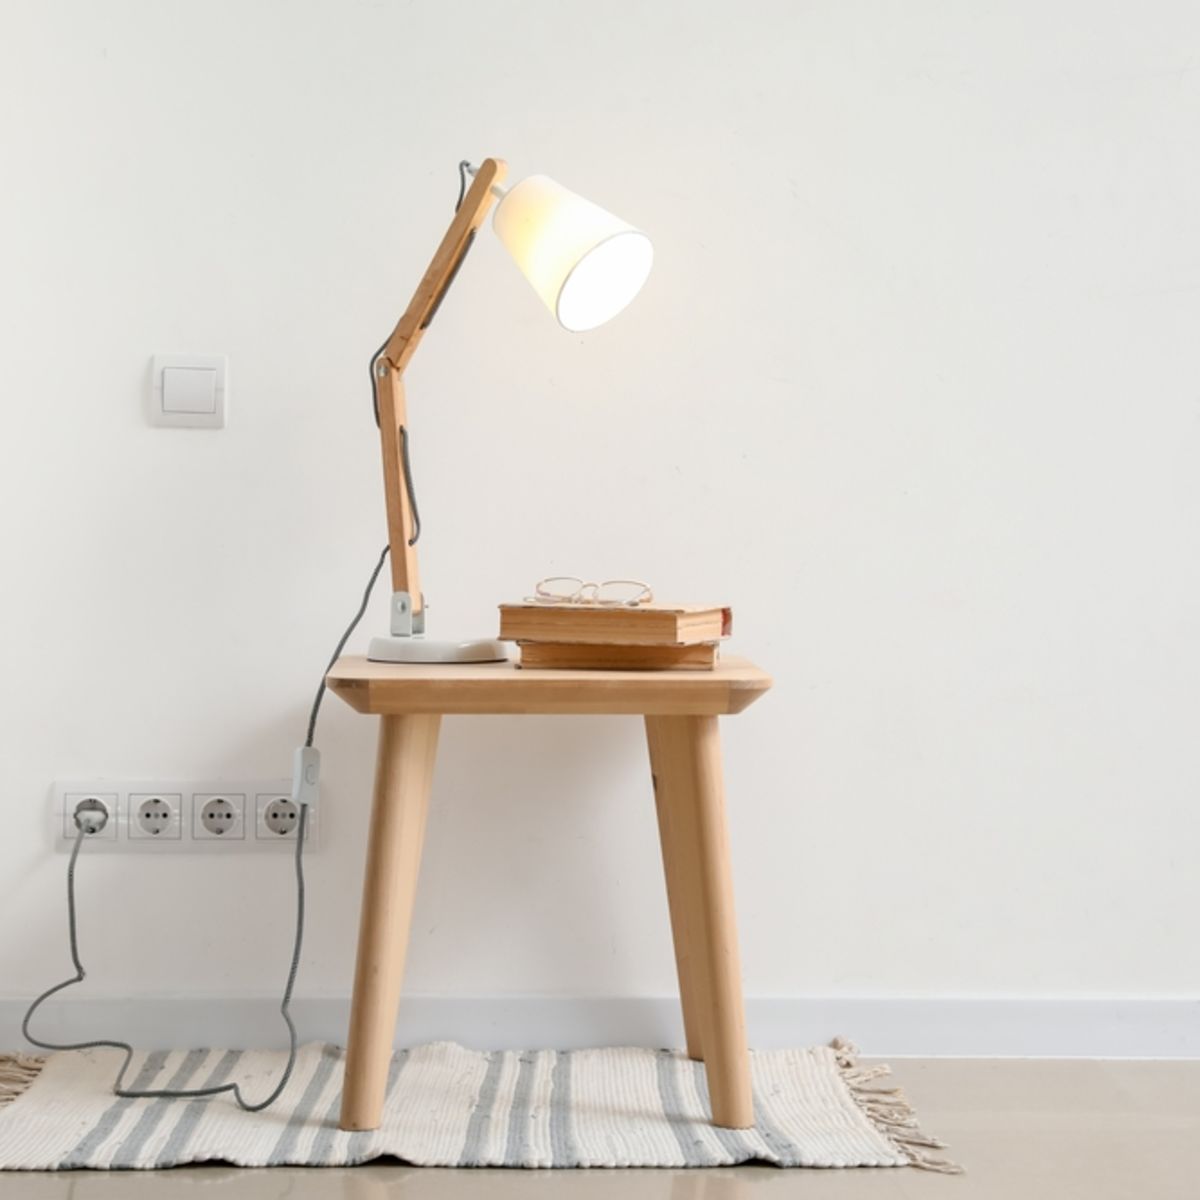 Lamp on side table and plugged into wall